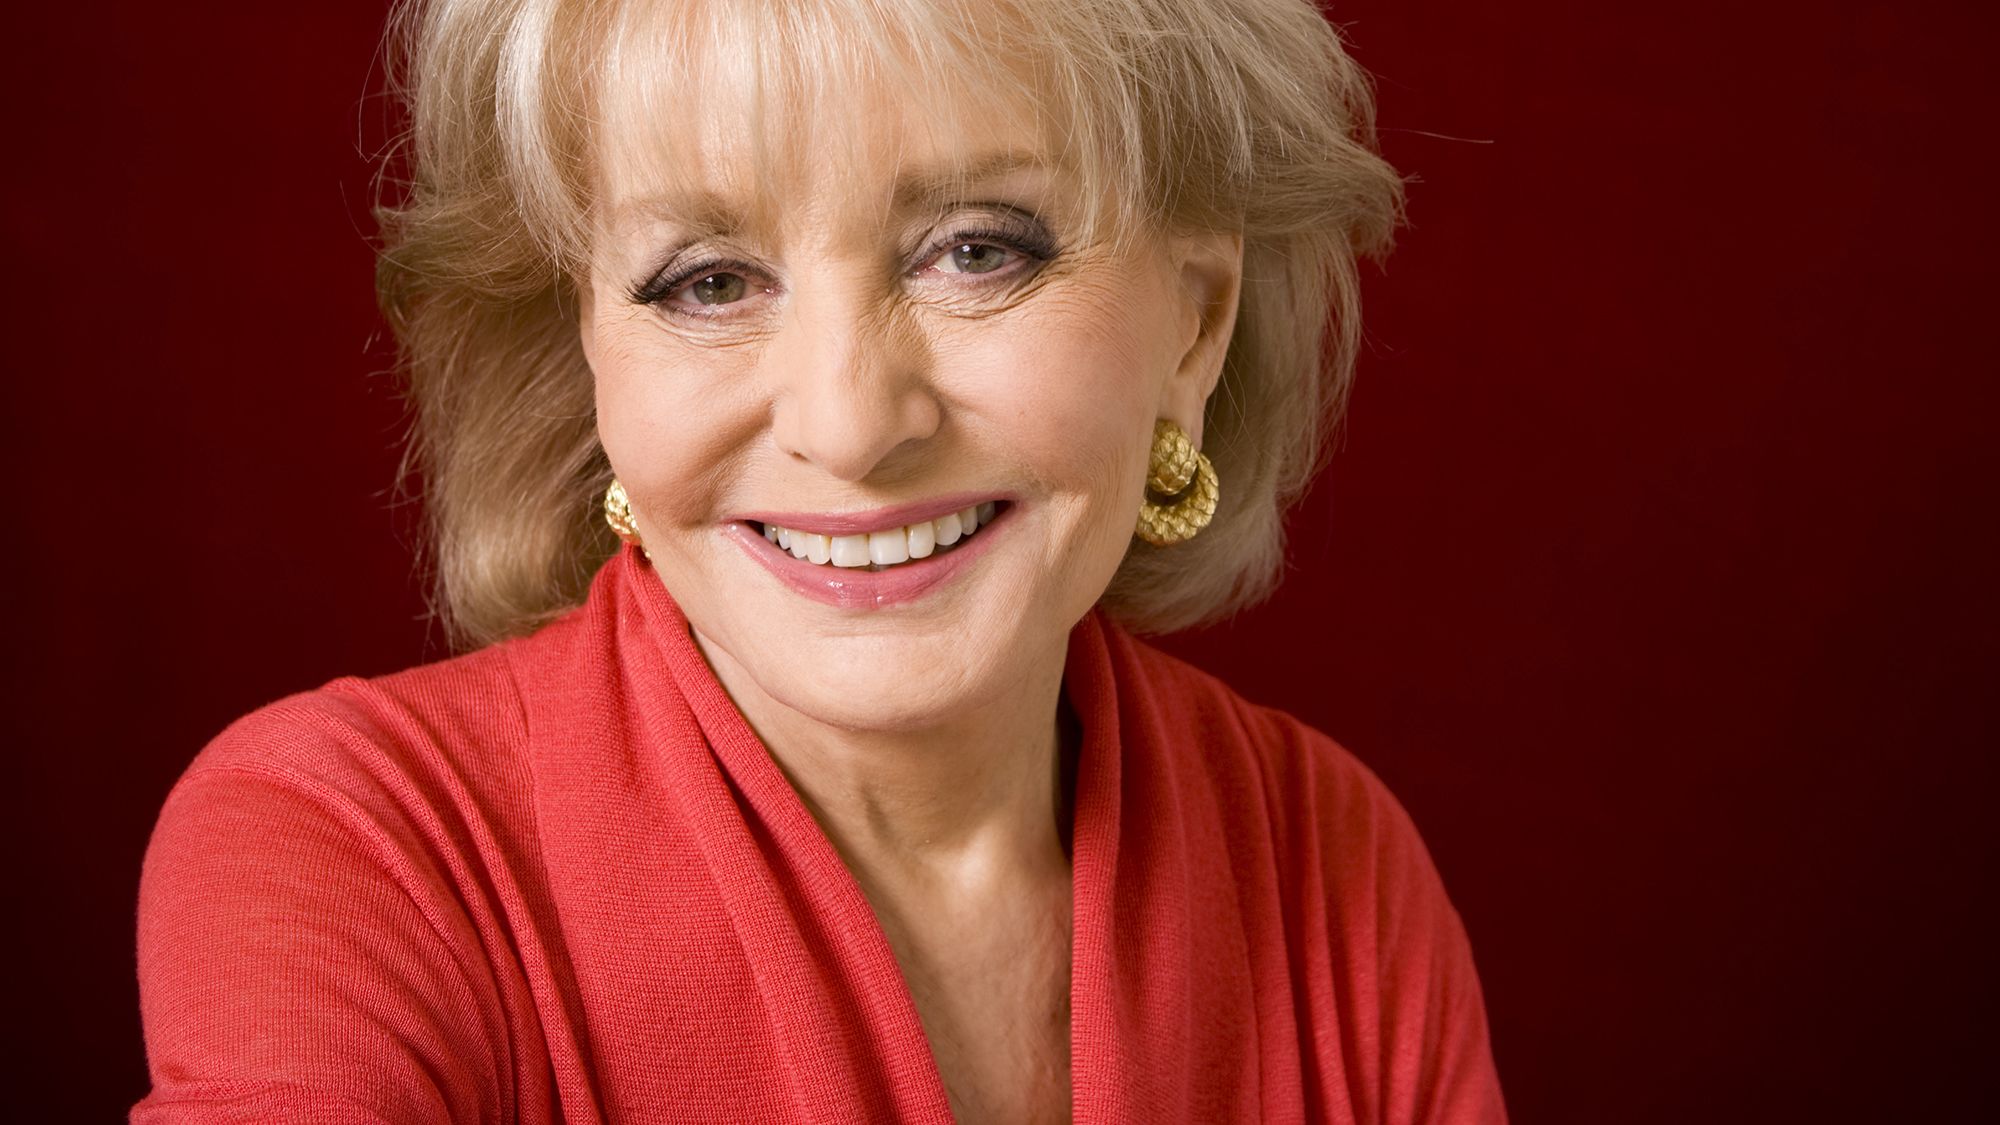 Barbara walters legendary news anchor has died at